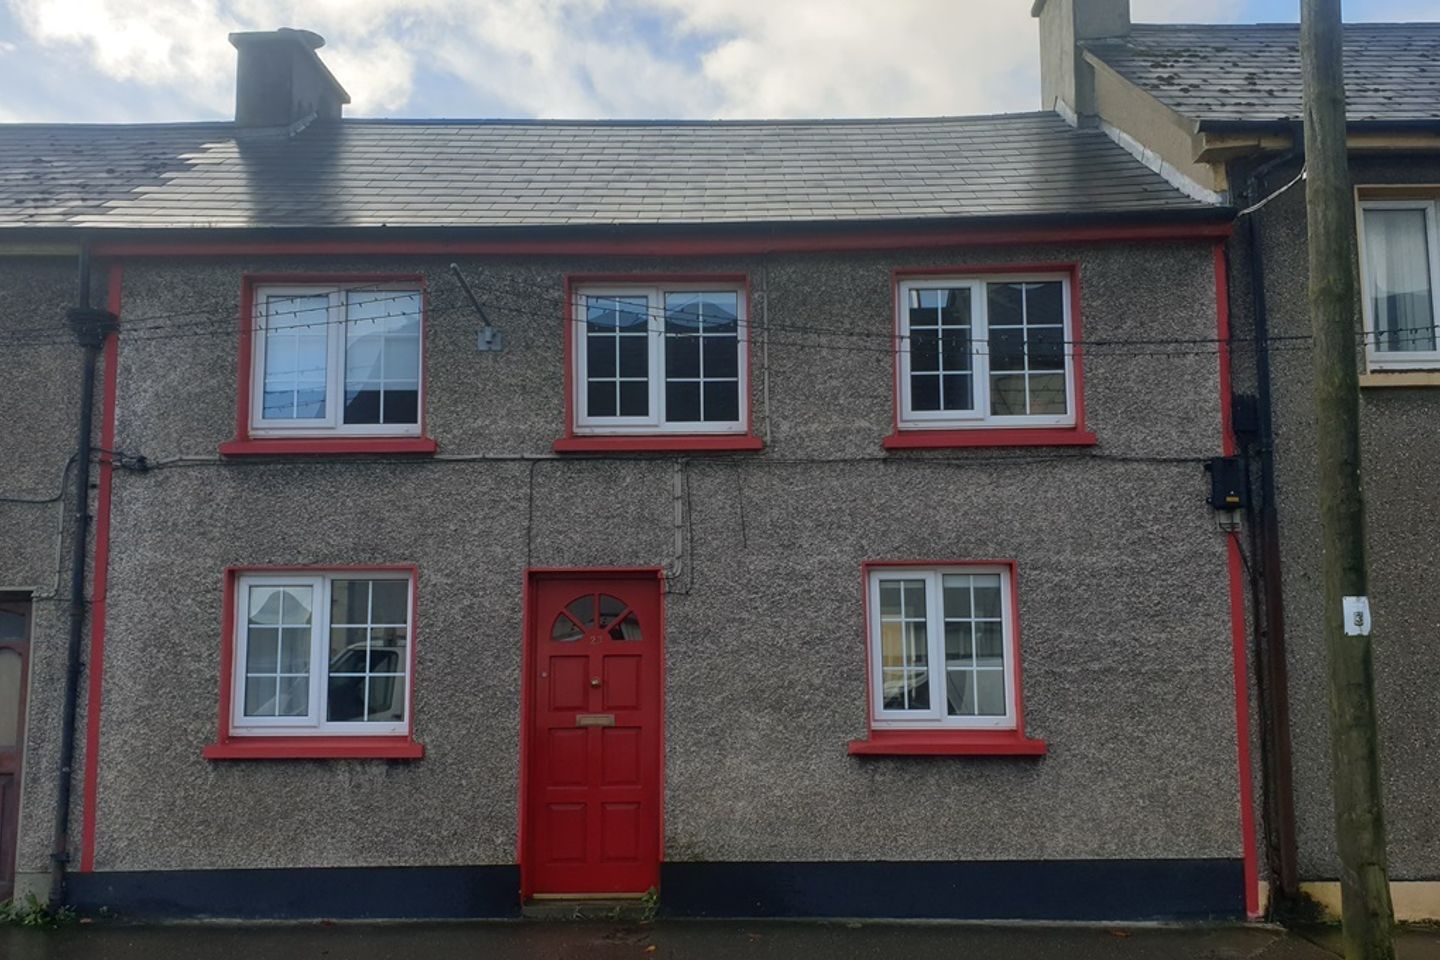 23 Pound Street, Carndonagh, Co. Donegal, F93VKX8